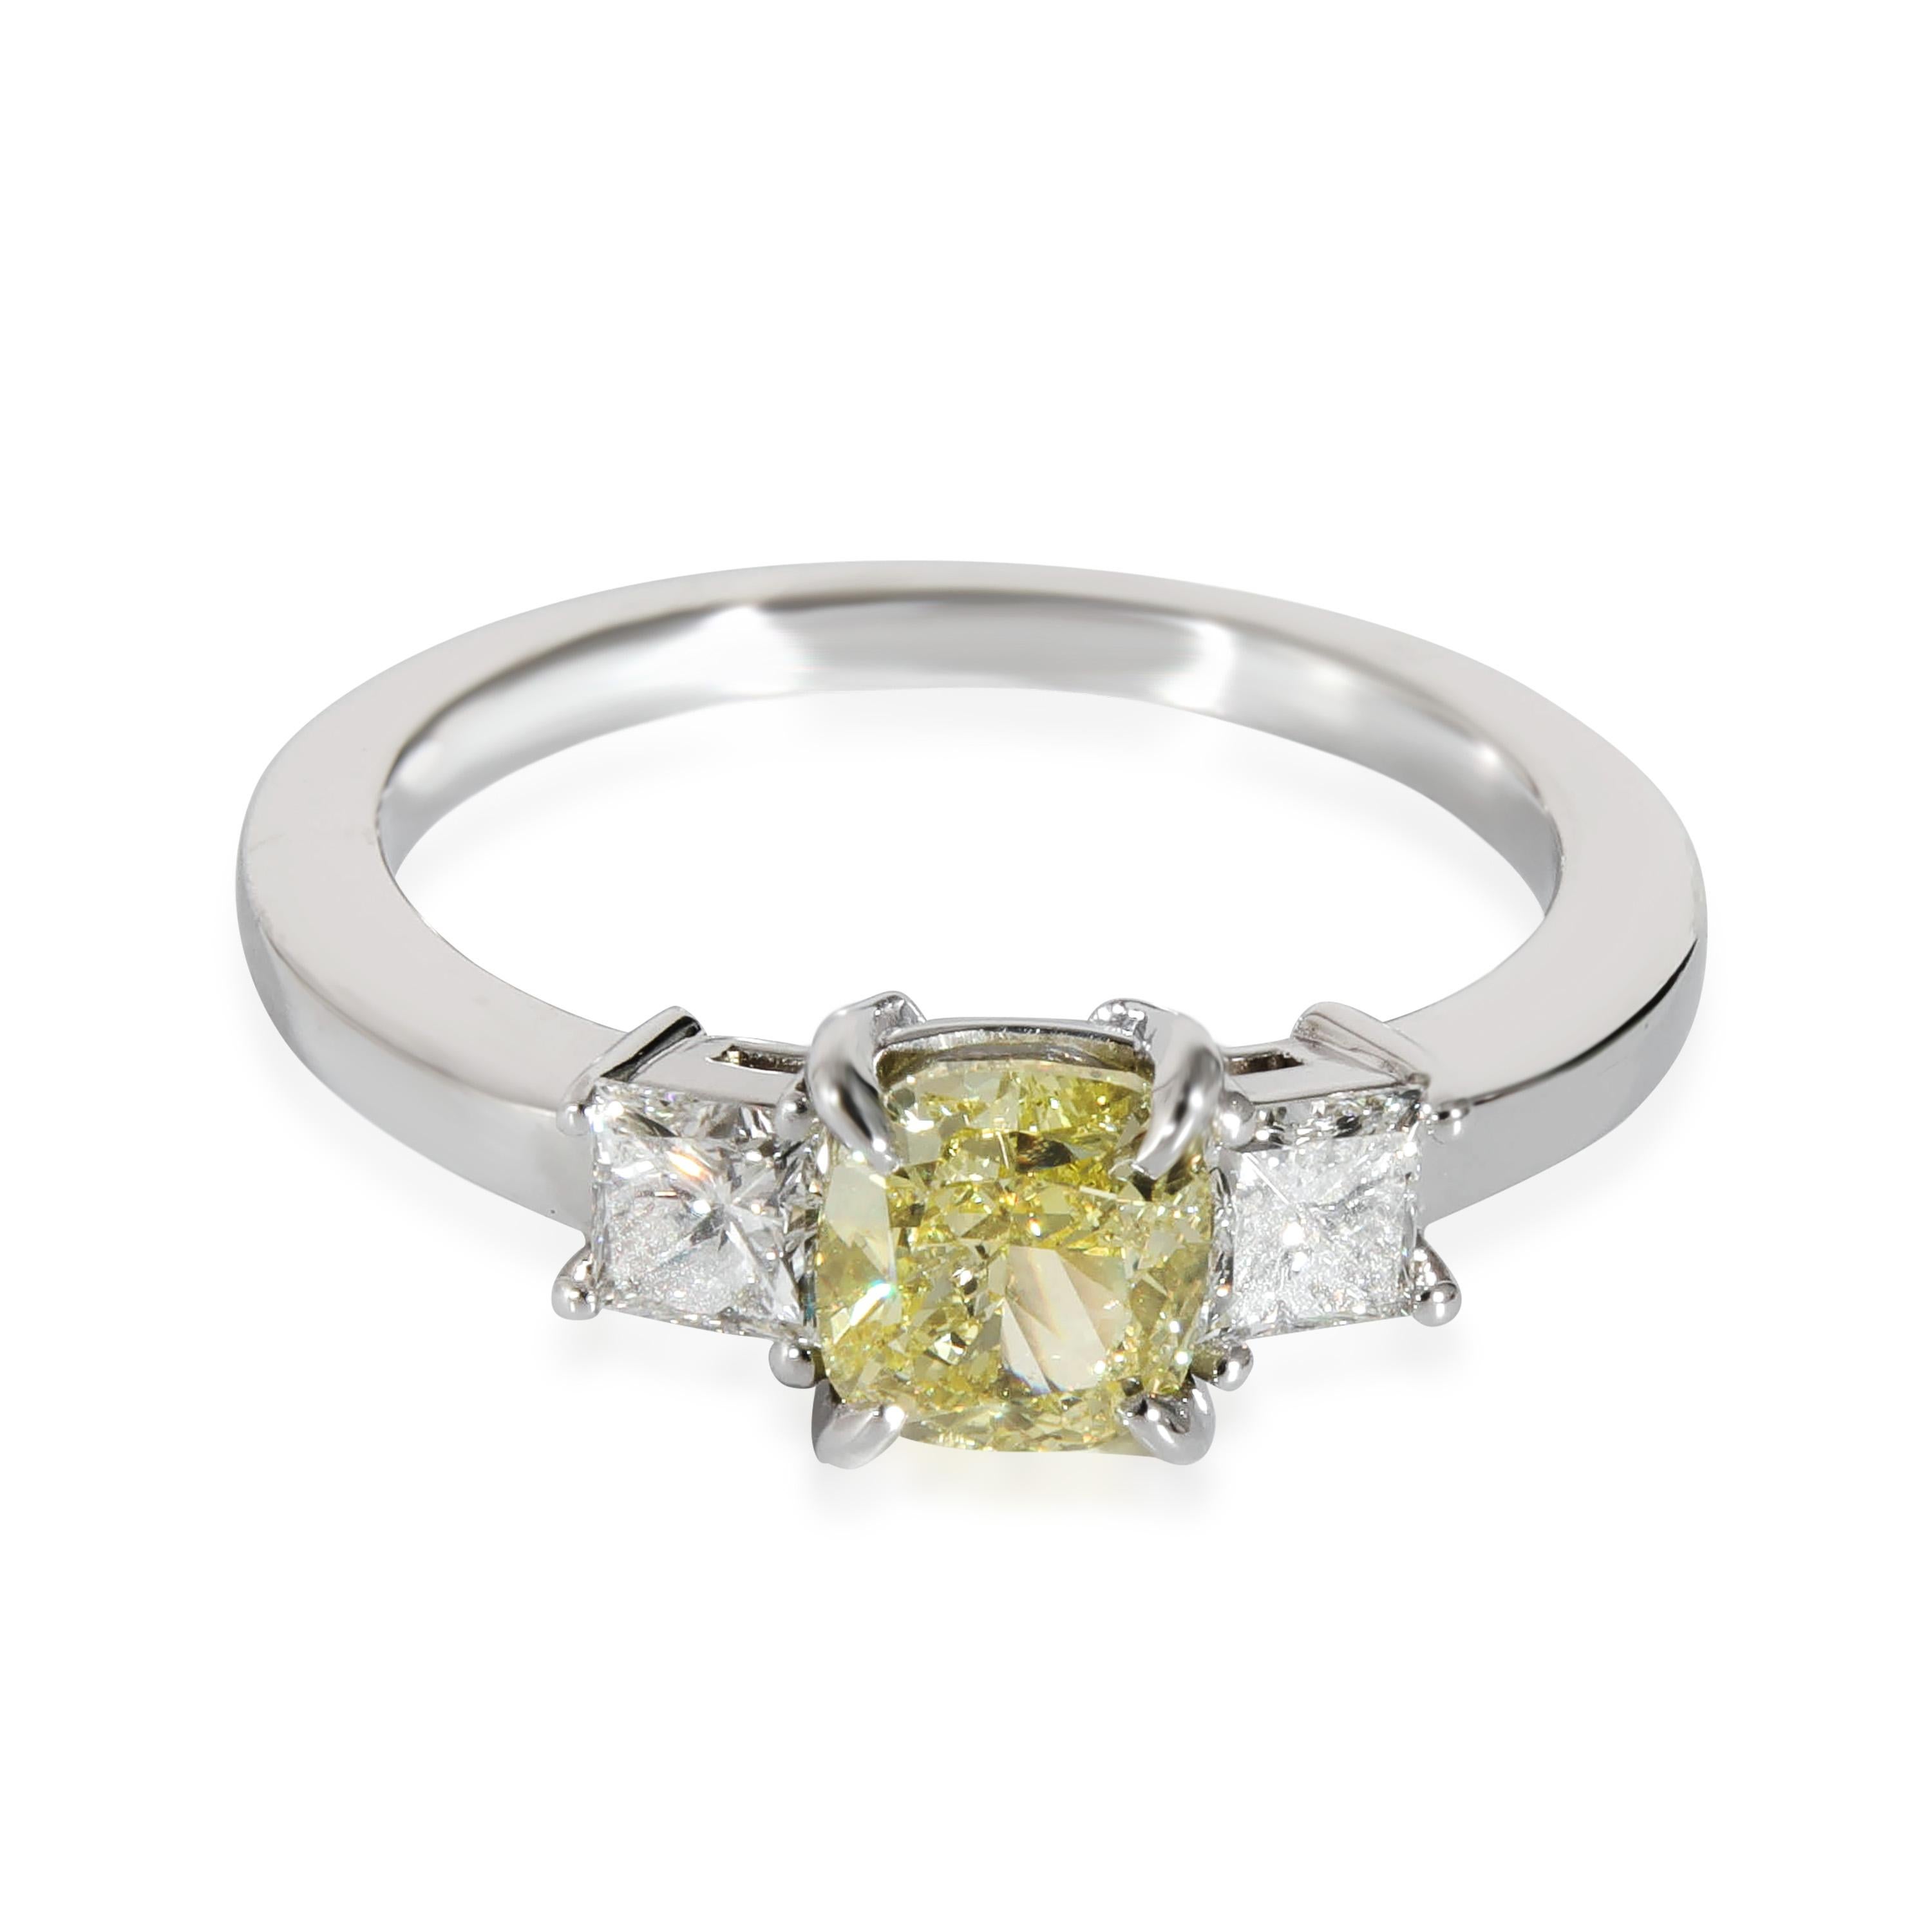 Fancy Intense Yellow Cushion Engagement Ring in Platinum VS1 1.31 CTW In Excellent Condition For Sale In New York, NY